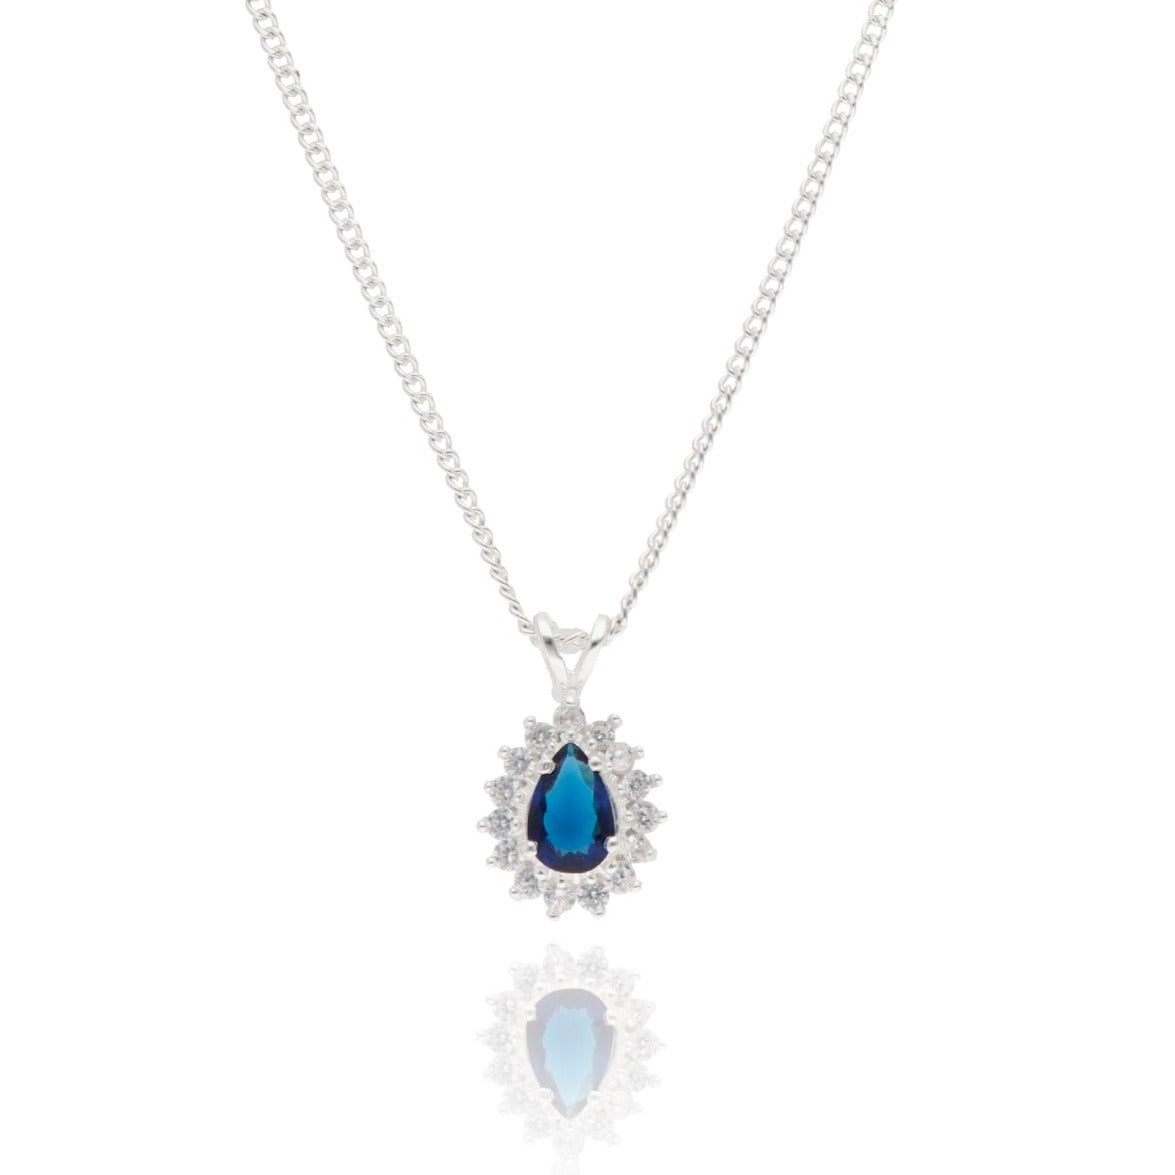 Celeste necklace in silver with Blue zirconia